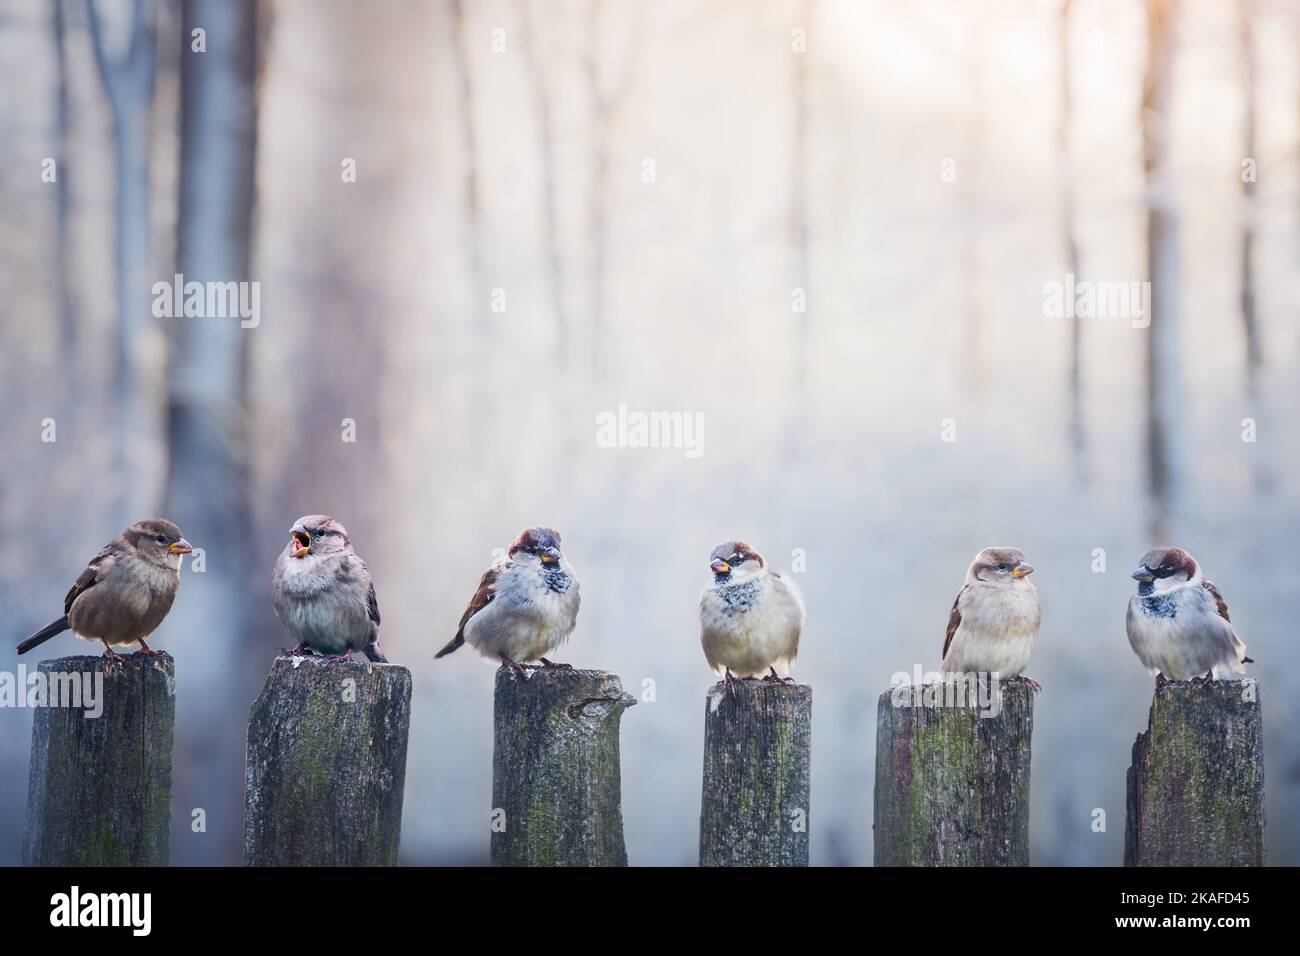 Sparrows in a row on wooden fence. Birds photography Stock Photo